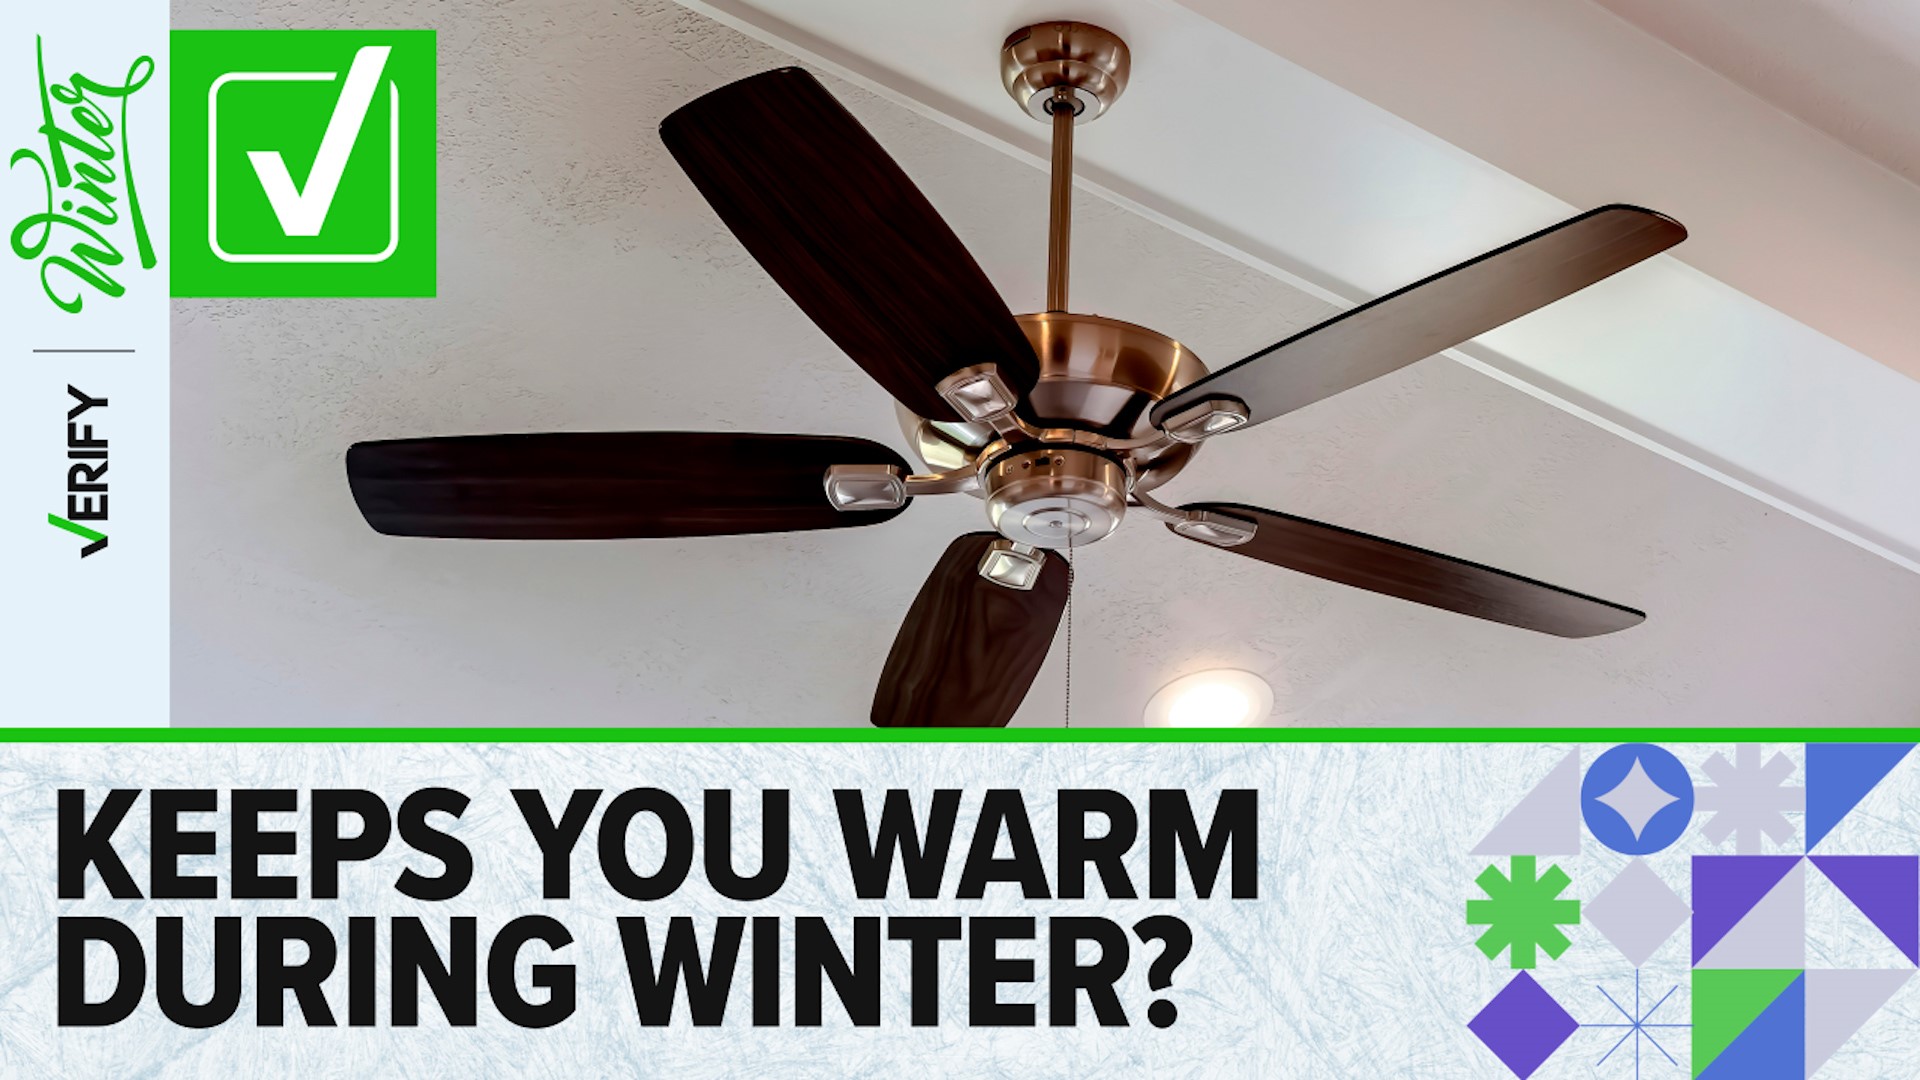 Setting your ceiling fan to spin clockwise during cold winter months can help the room feel warmer and potentially save you money on energy costs.